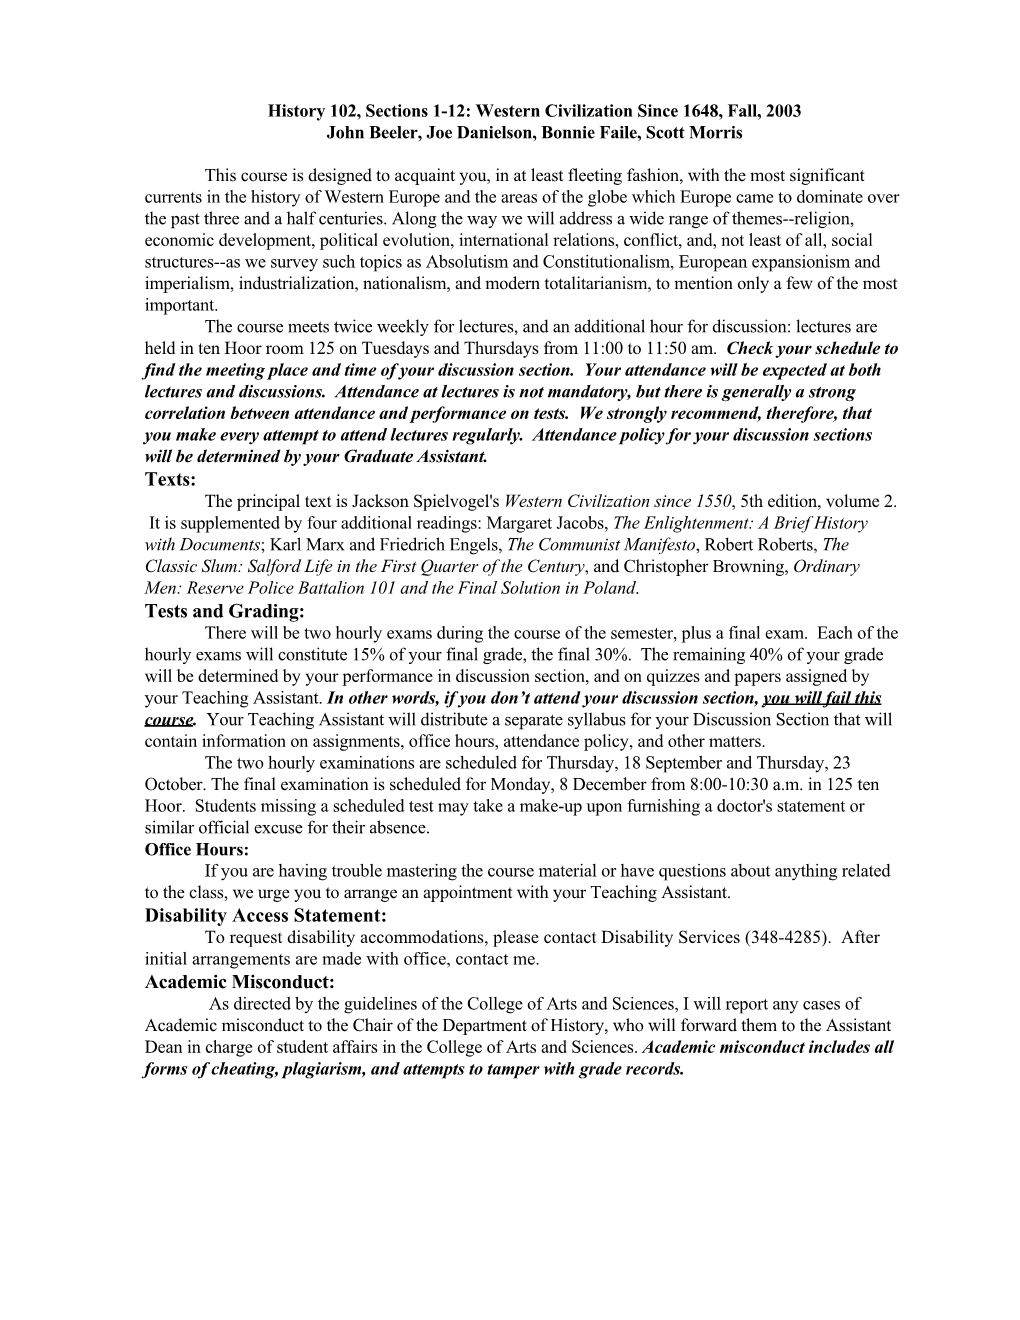 Tests and Grading: Disability Access Statement: Academic Misconduct